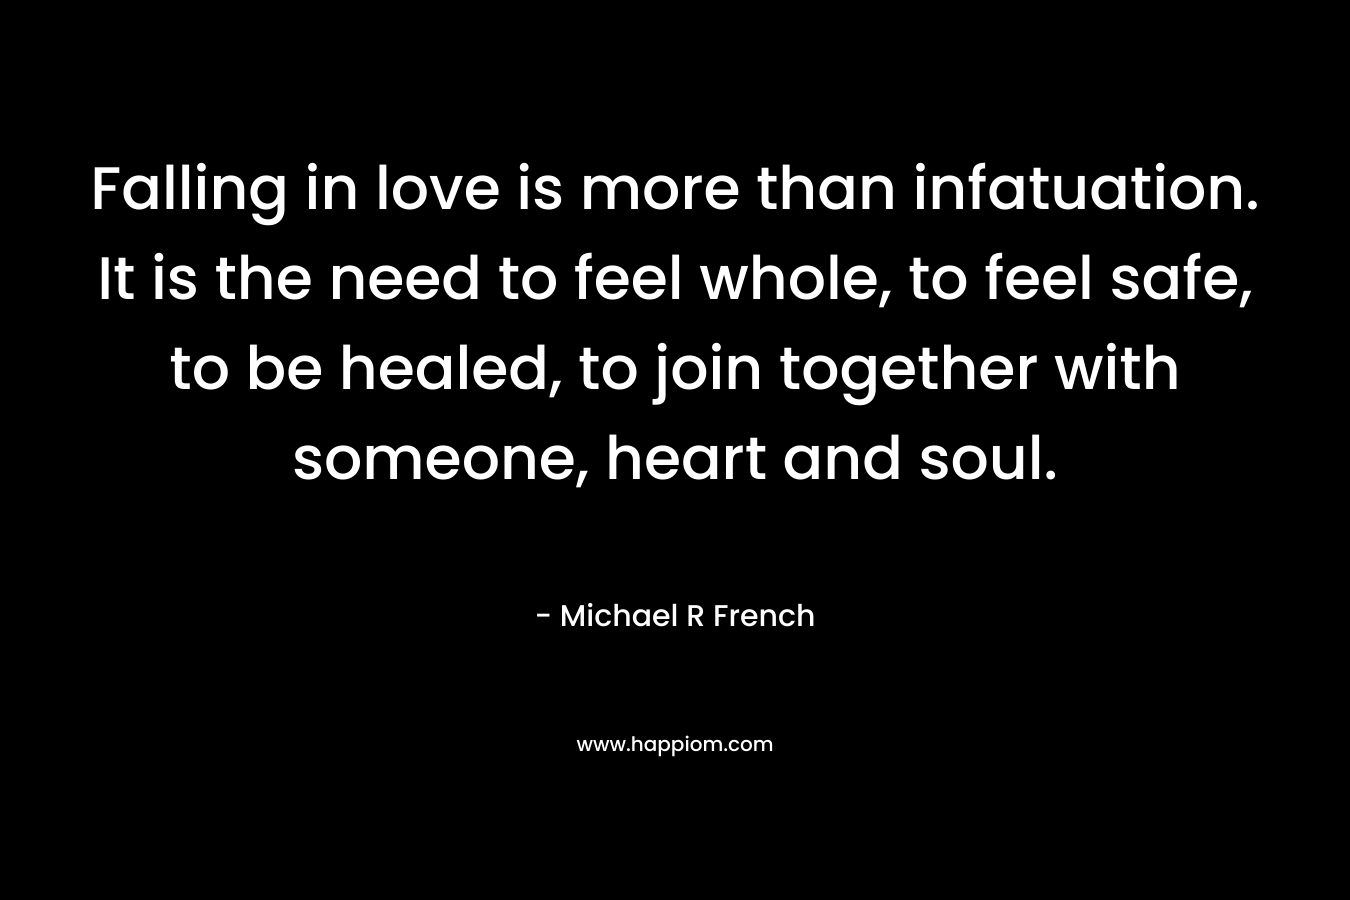 Falling in love is more than infatuation. It is the need to feel whole, to feel safe, to be healed, to join together with someone, heart and soul.